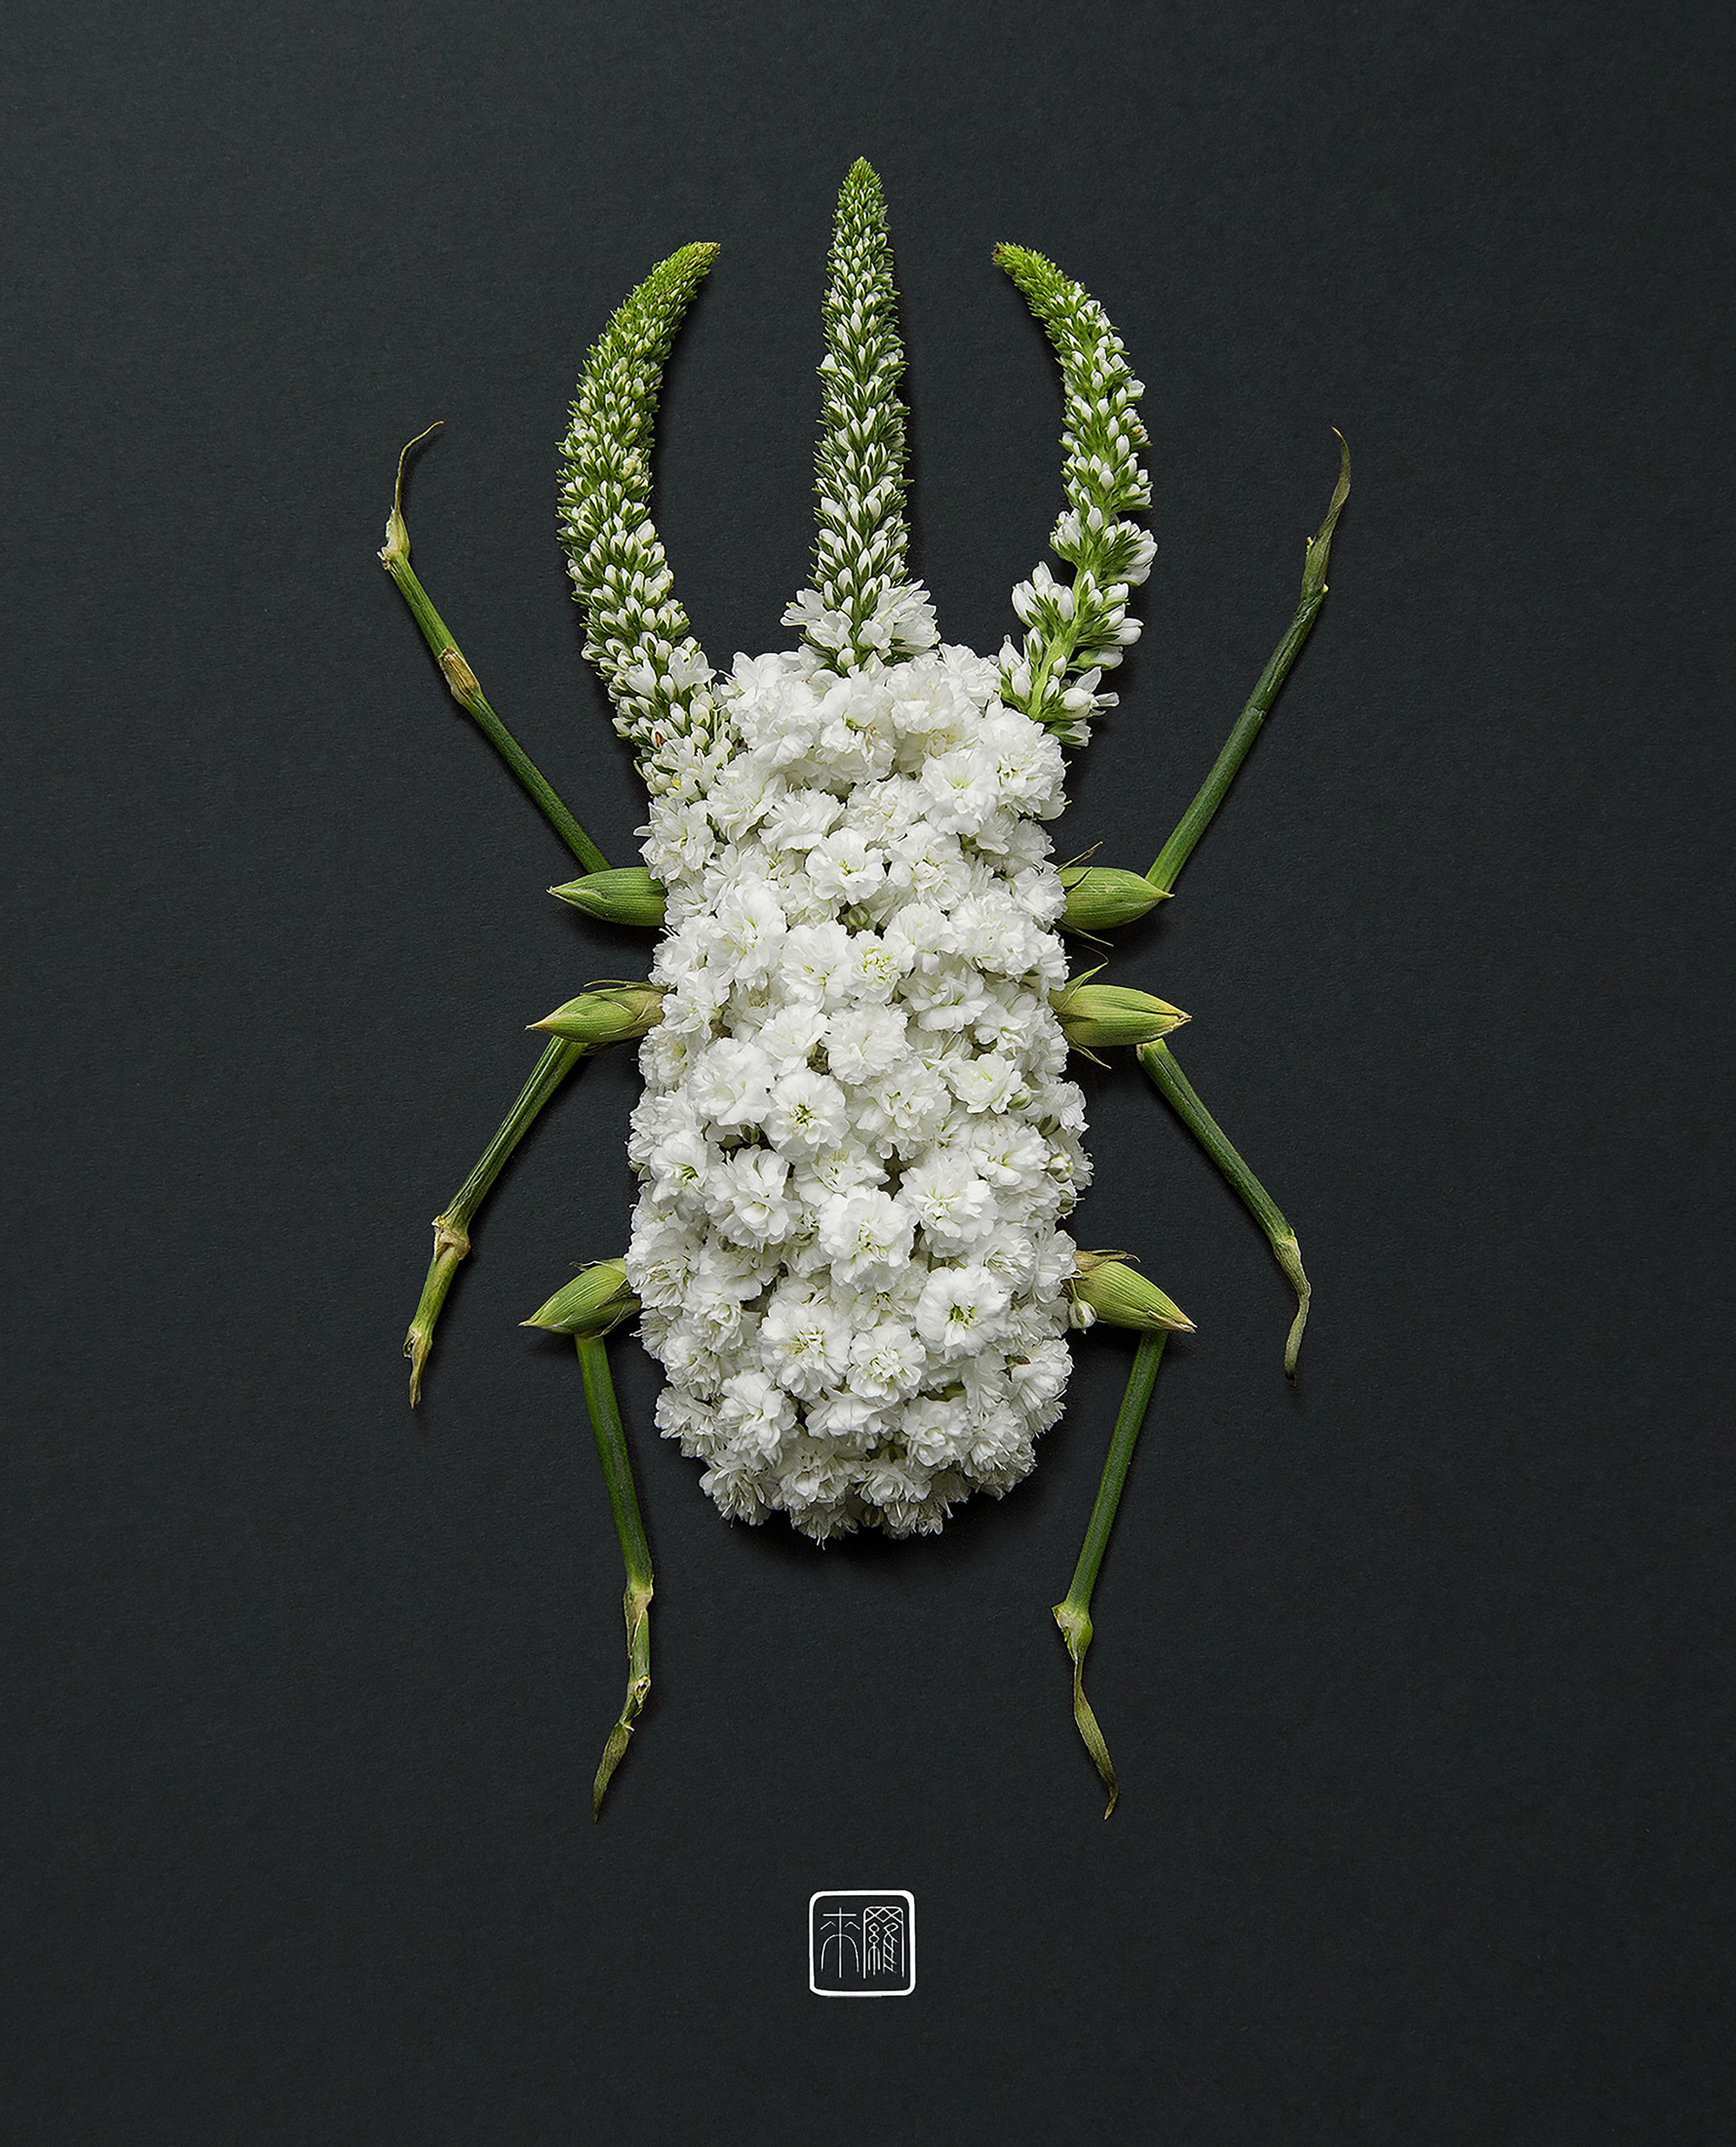 Flower Petals and Stems Transform into Animals and Insects in Inventive new Arrangements